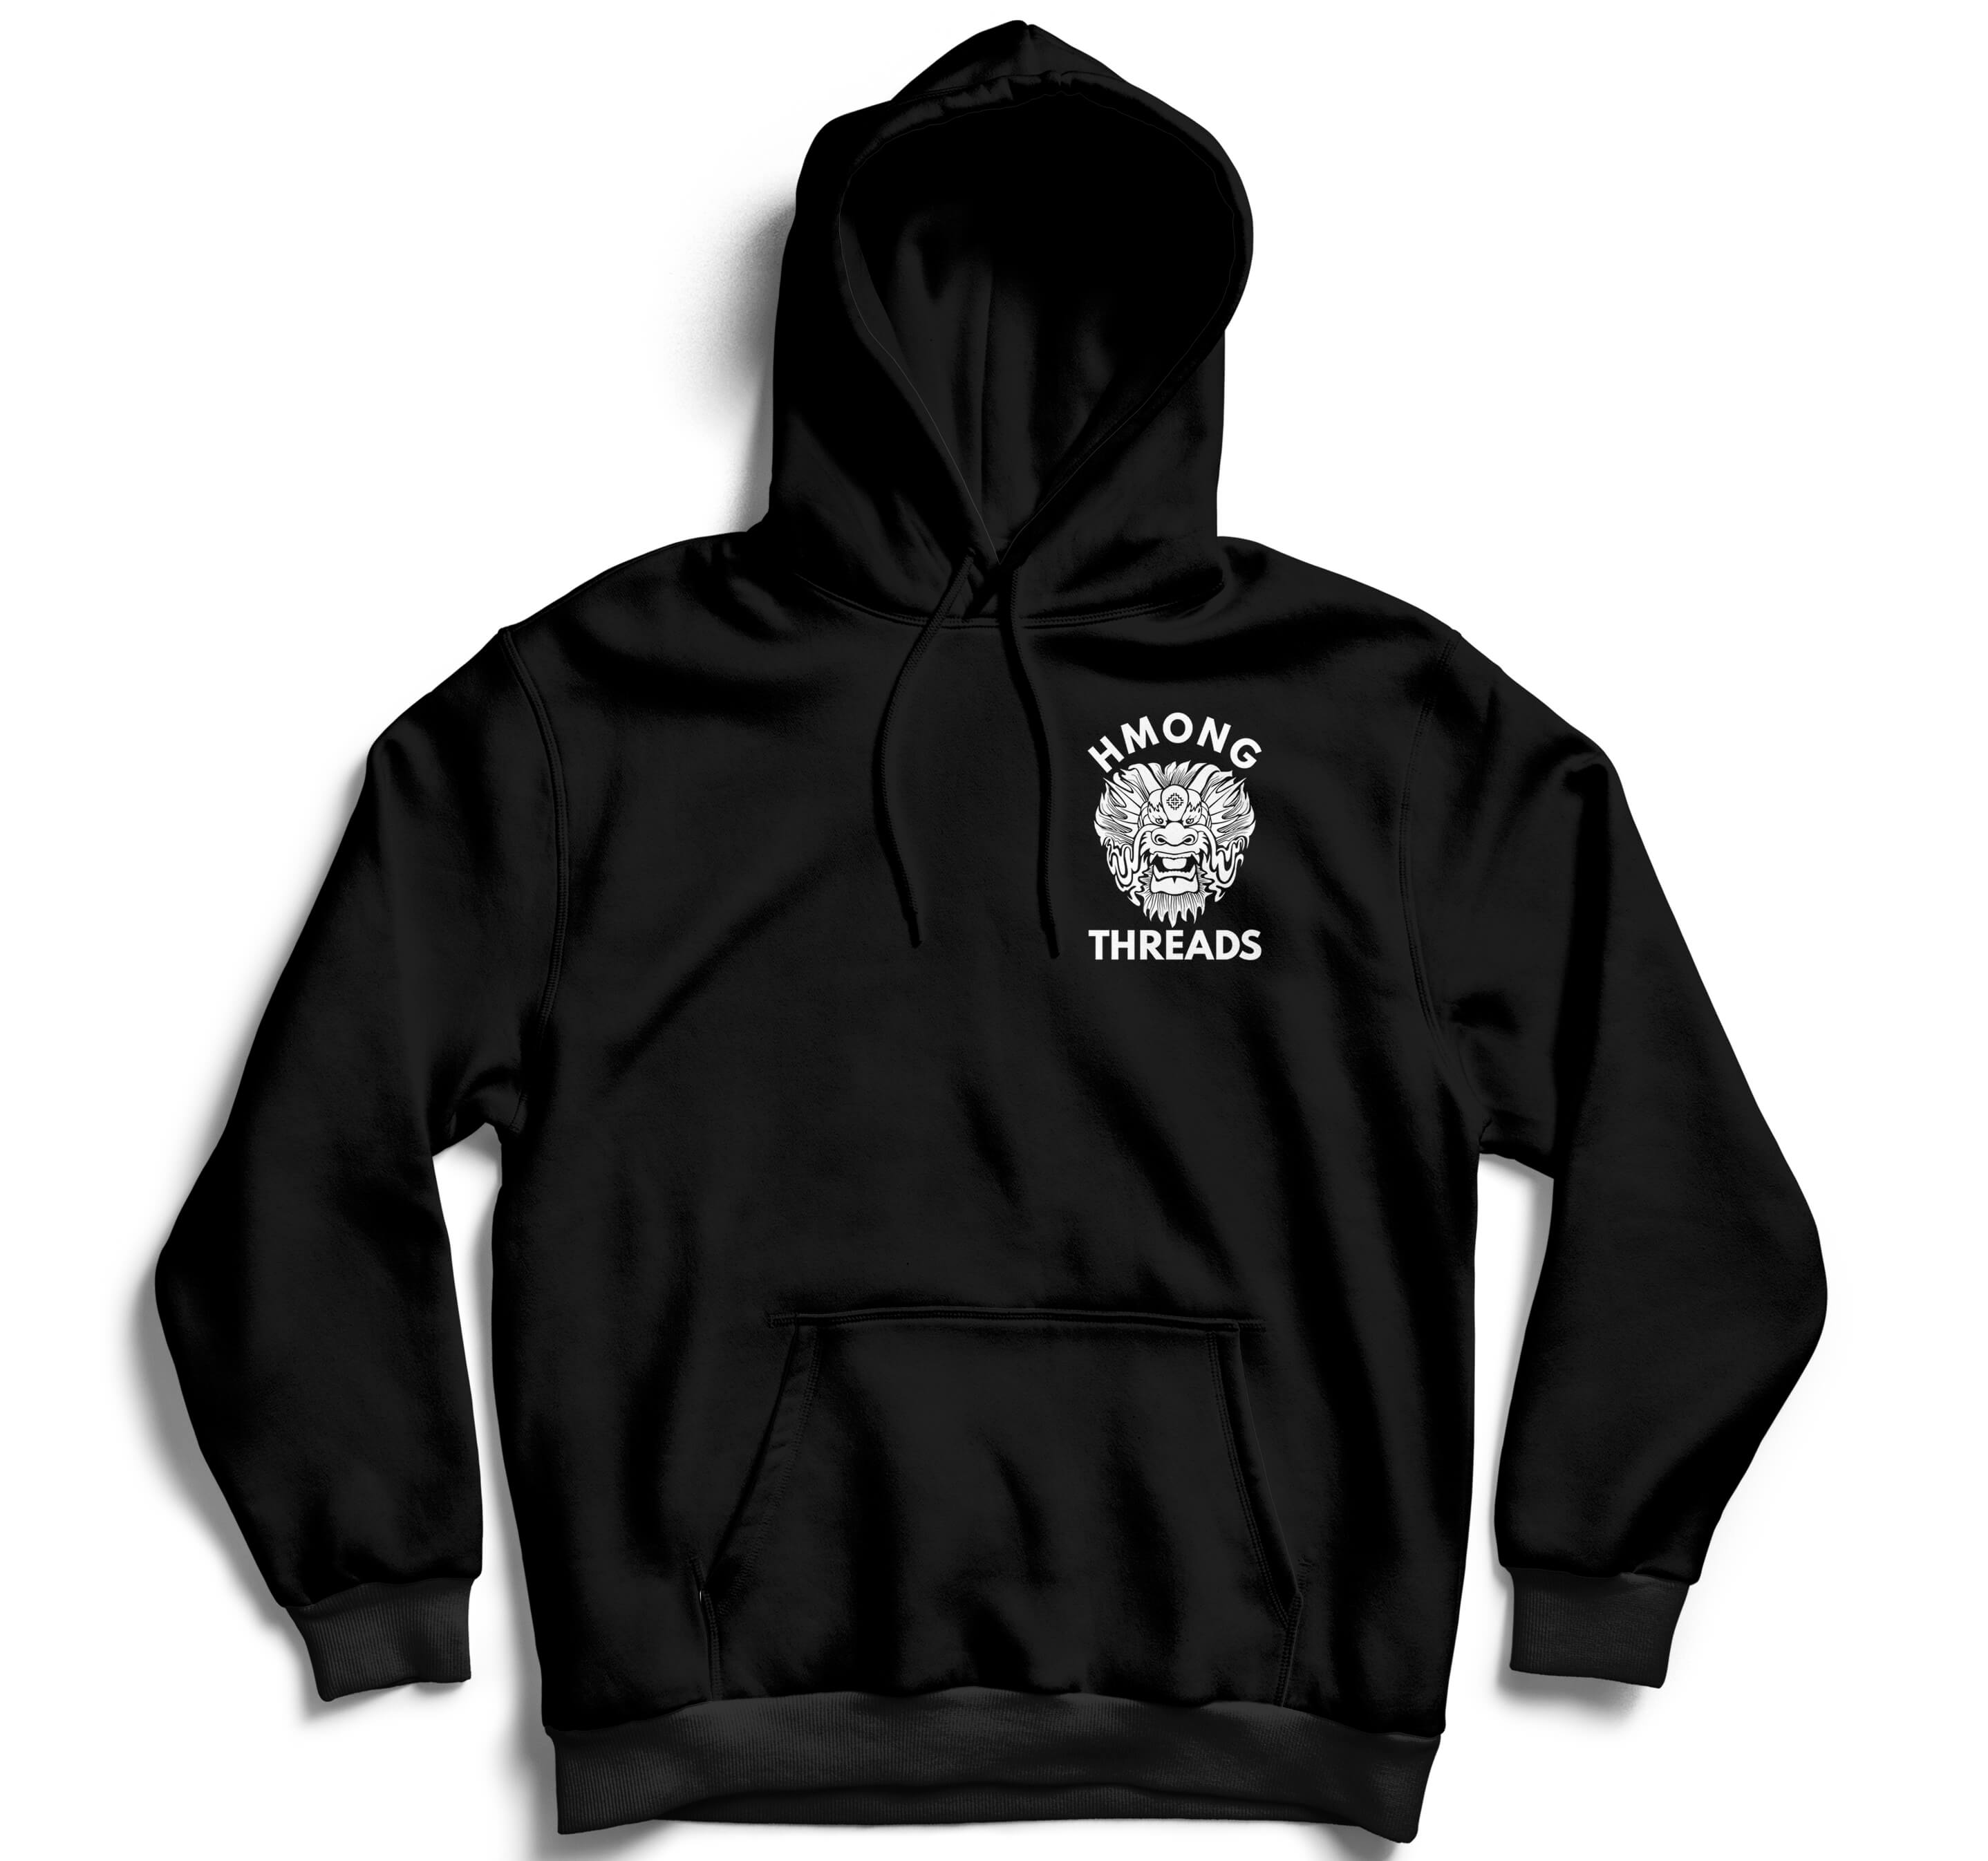 HMONG THREADS AUTHENTIC BLACK UNISEX HOODIE